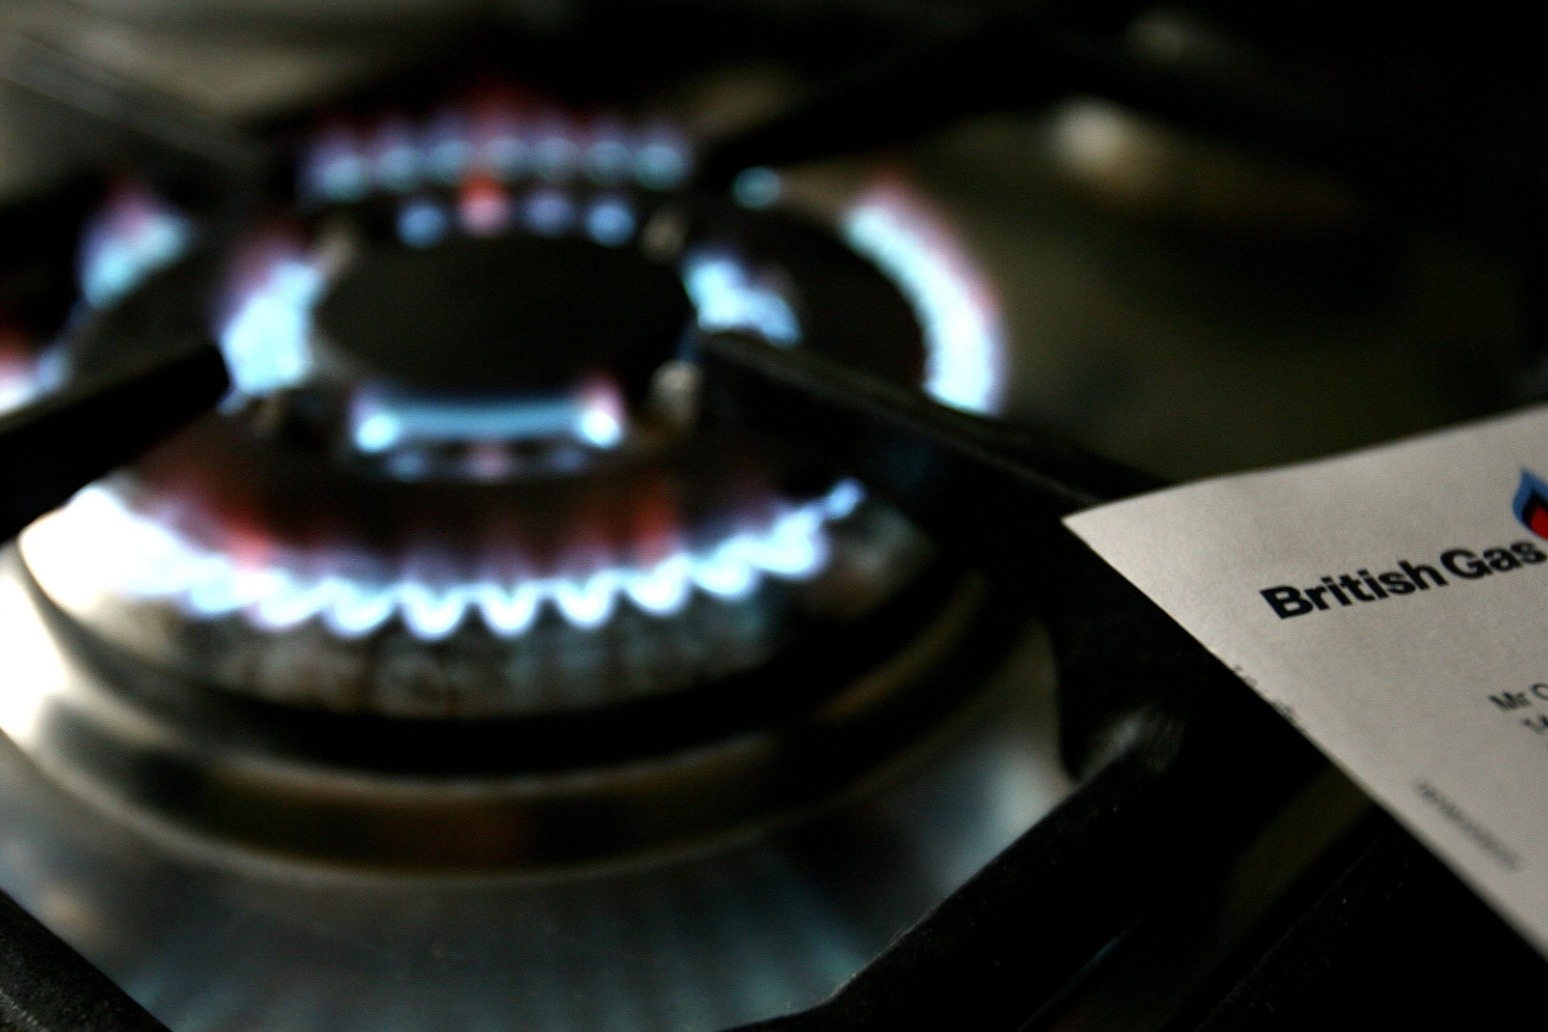 400 in energy bill discounts offered to households in instalments